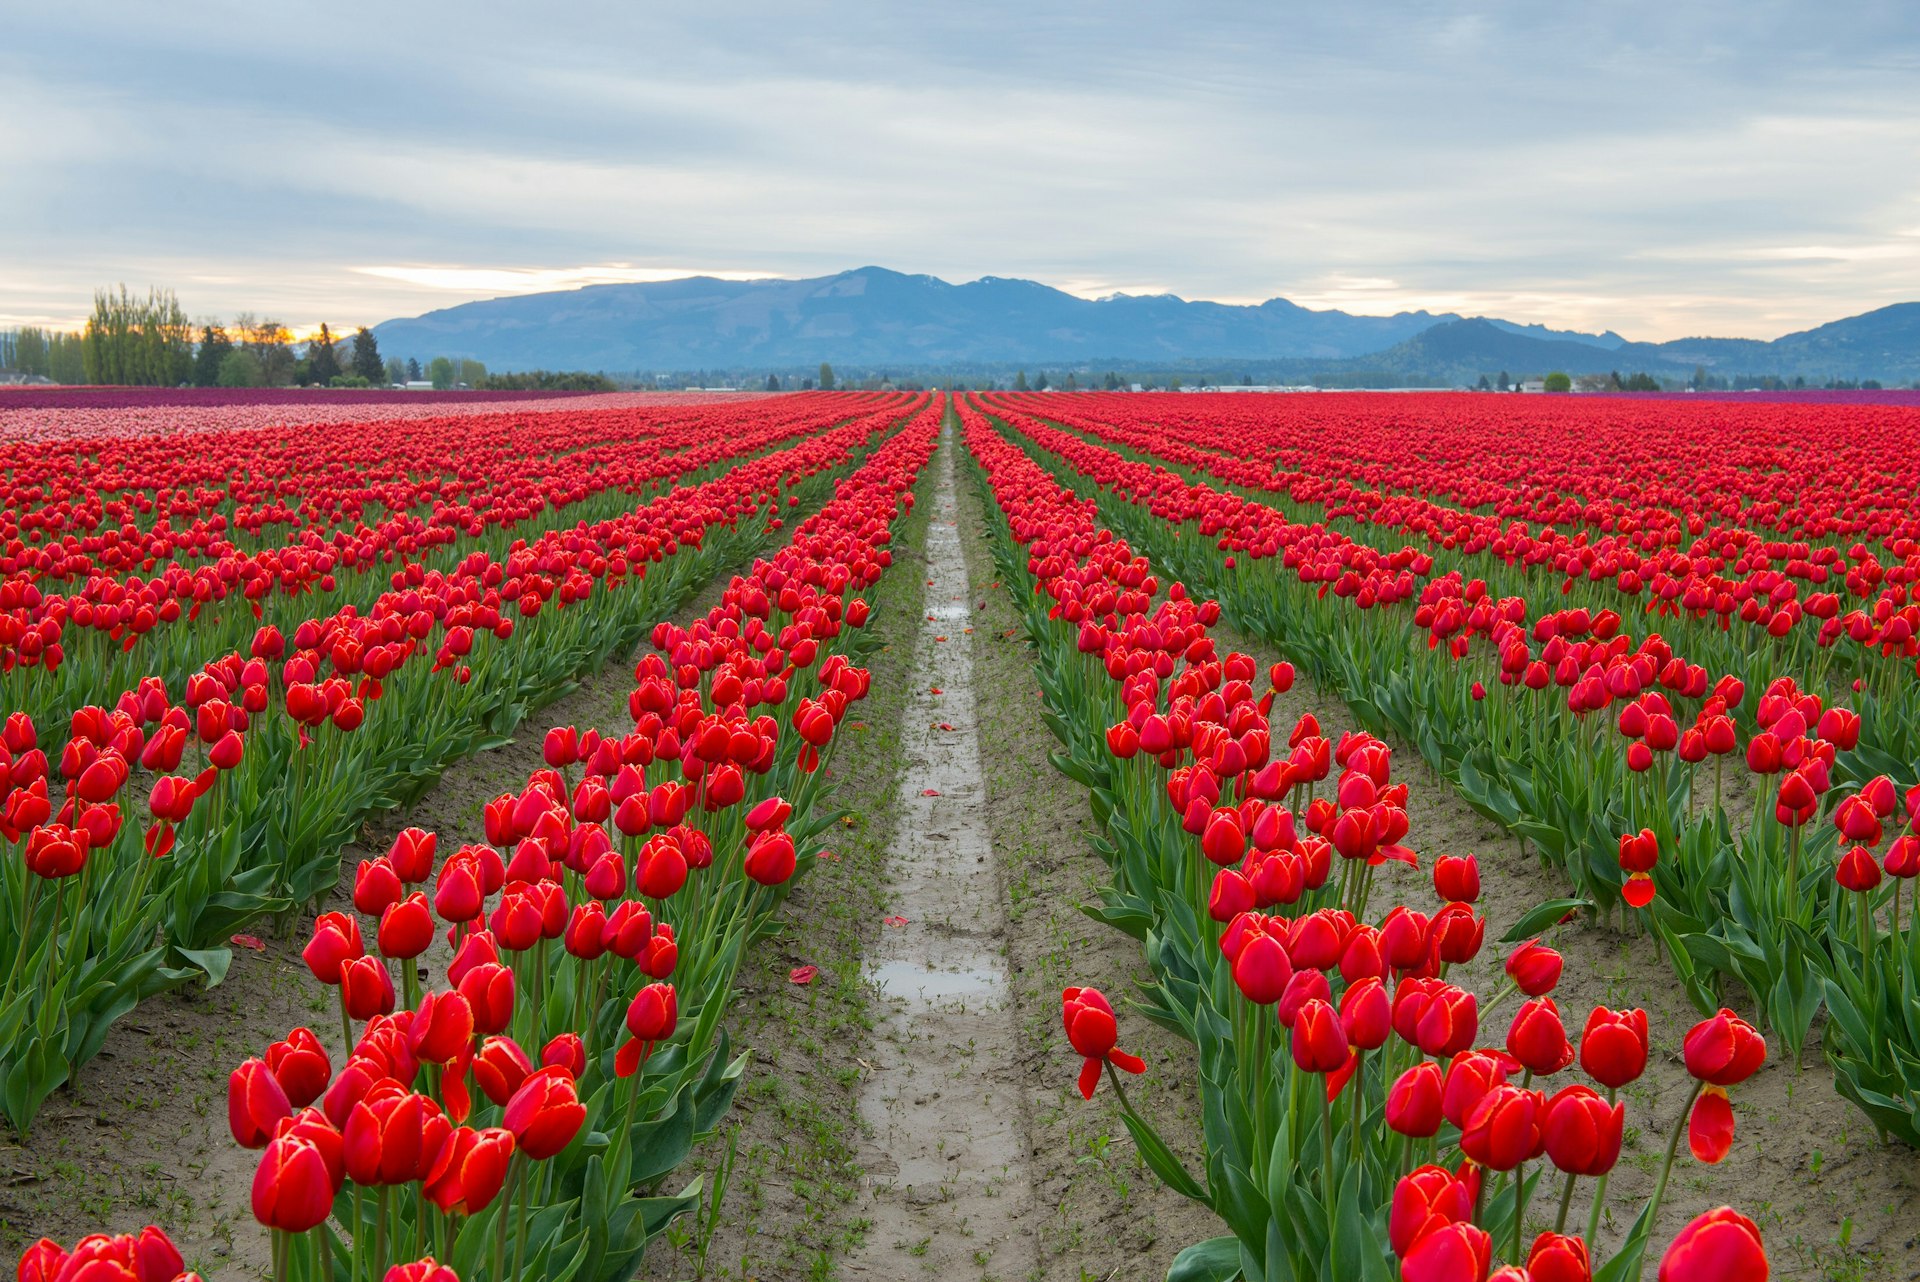 Rows of red tulips Washington State